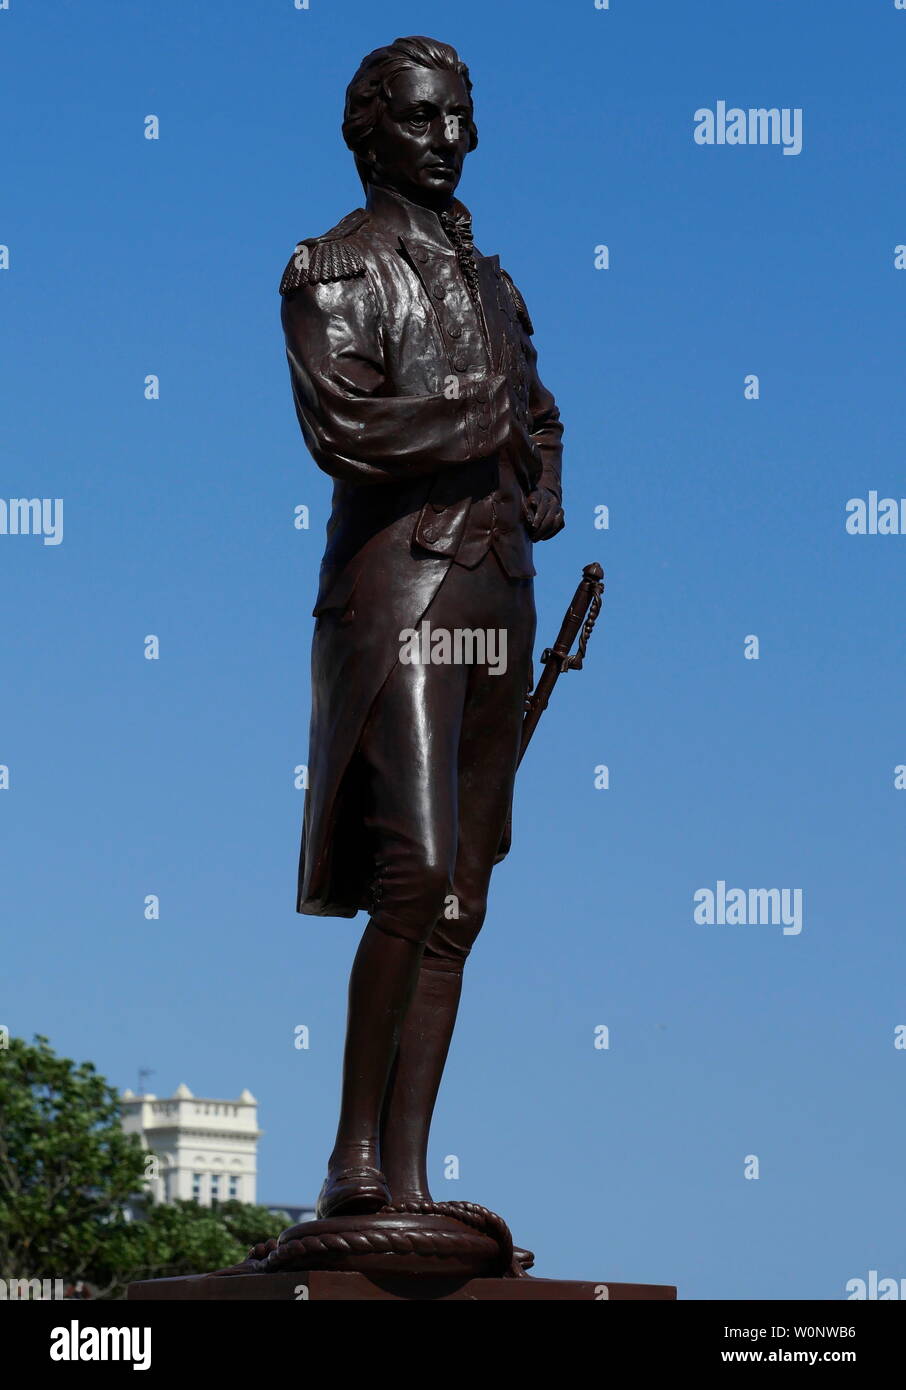 AJAXNETPHOTO. 3RD JUNE, 2019. SOUTHSEA, ENGLAND. - TRAFALGAR HERO - BRONZE STATUE OF BATTLE OF TRAFALGAR COMMANDER ADMIRAL HORATIO NELSON NEAR GRAND PARADE, OLD PORTSMOUTH. STATUE WAS CENTRE OF A DISPUTE BETWEEN PORTSMOUTH COUNCIL AND PROTESTORS AGAINST MOVING IT FROM ITS ORIGINAL LOCATION NEAR SOUTHSEA COMMON CLOSER TO THE SEA. PHOTO:JONATHAN EASTLAND/AJAX REF:GX8 190306 369 Stock Photo